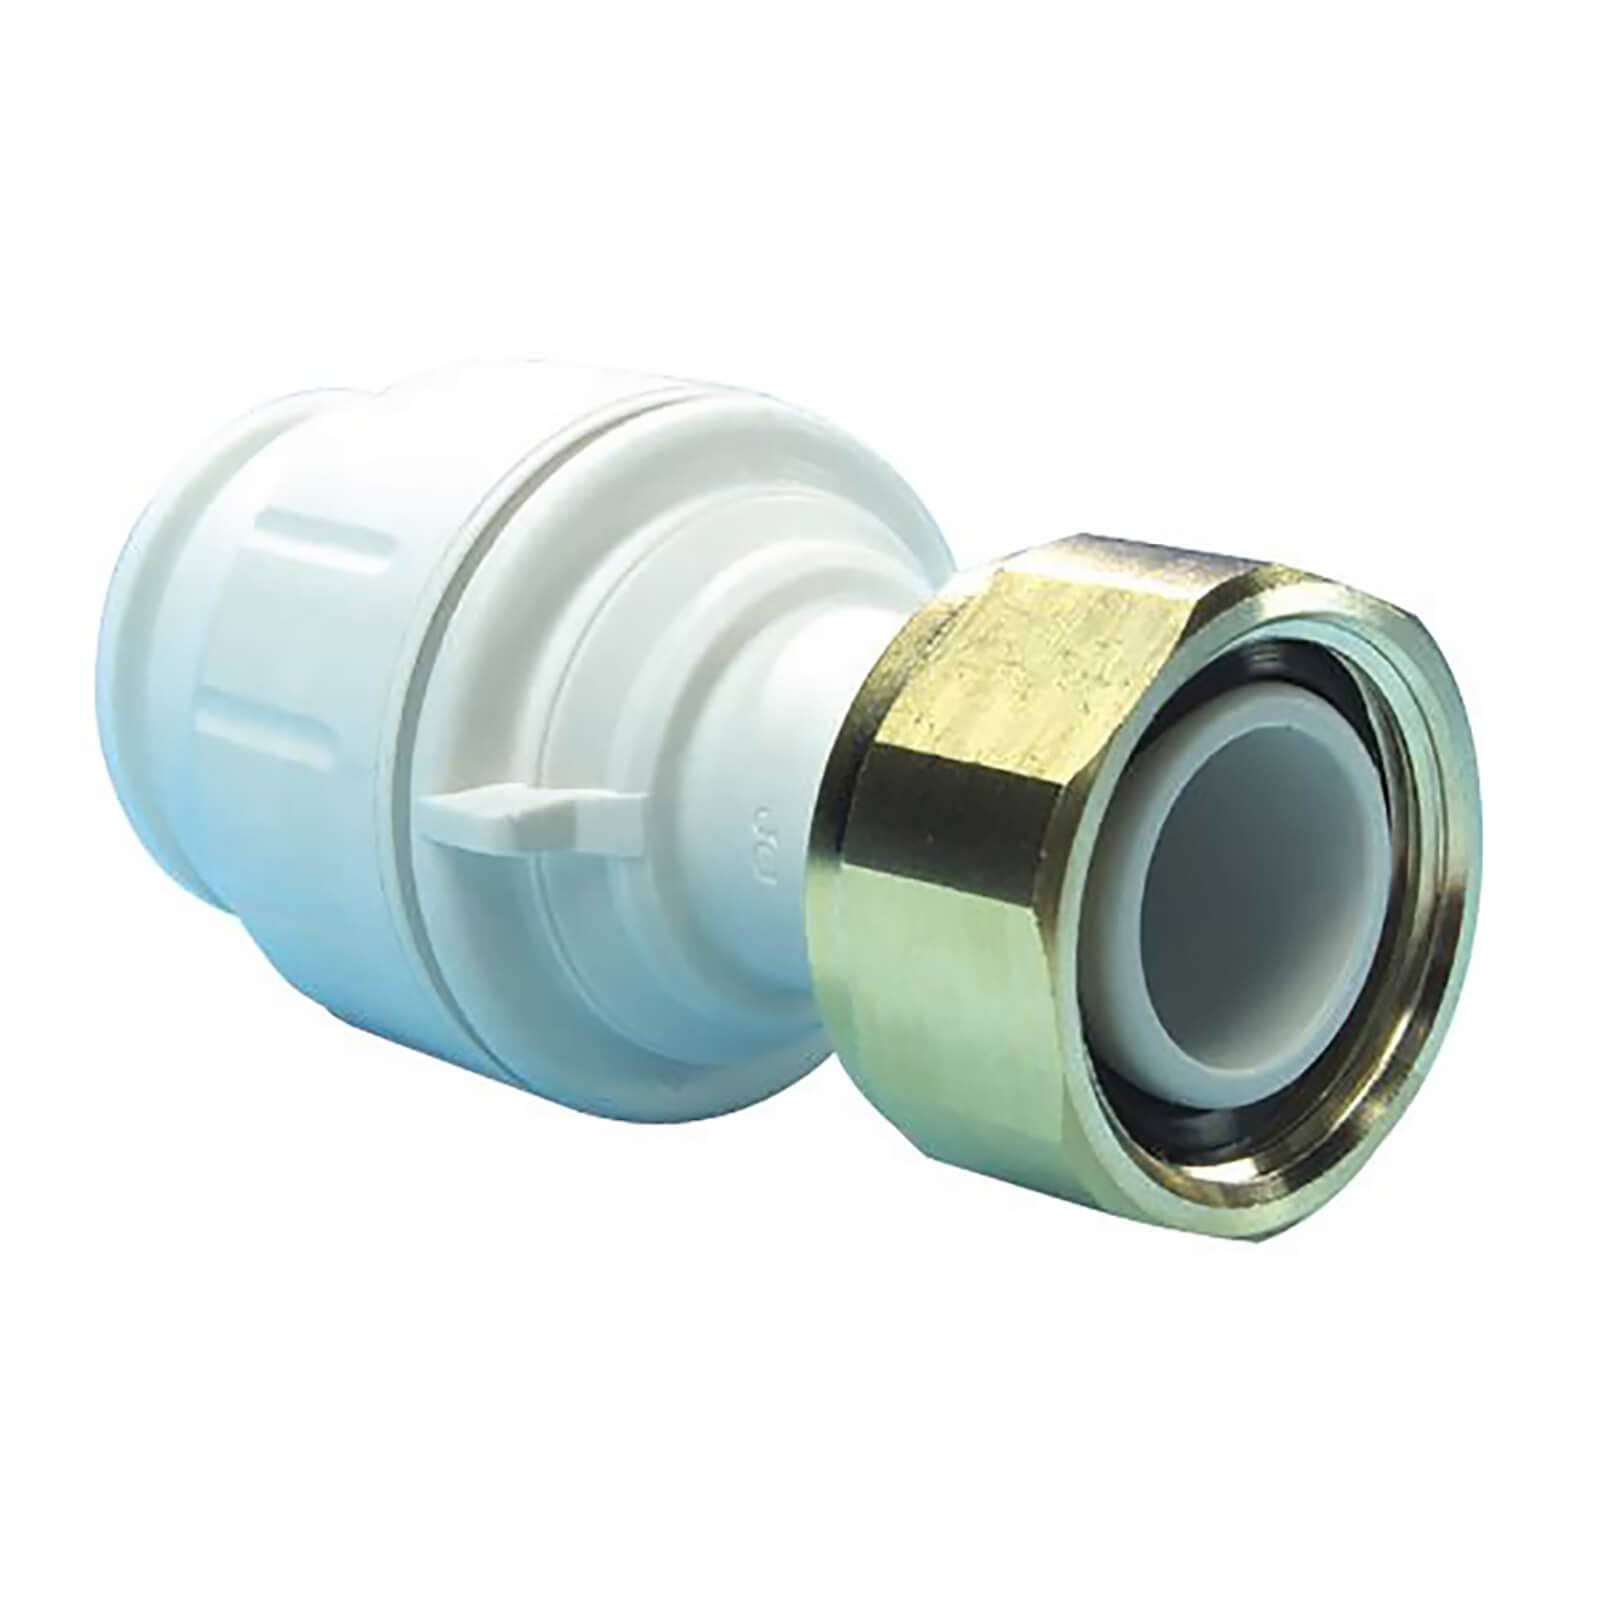 Photo of Jg Speedfit Straight Tap Connector - 22mm X 3/4in